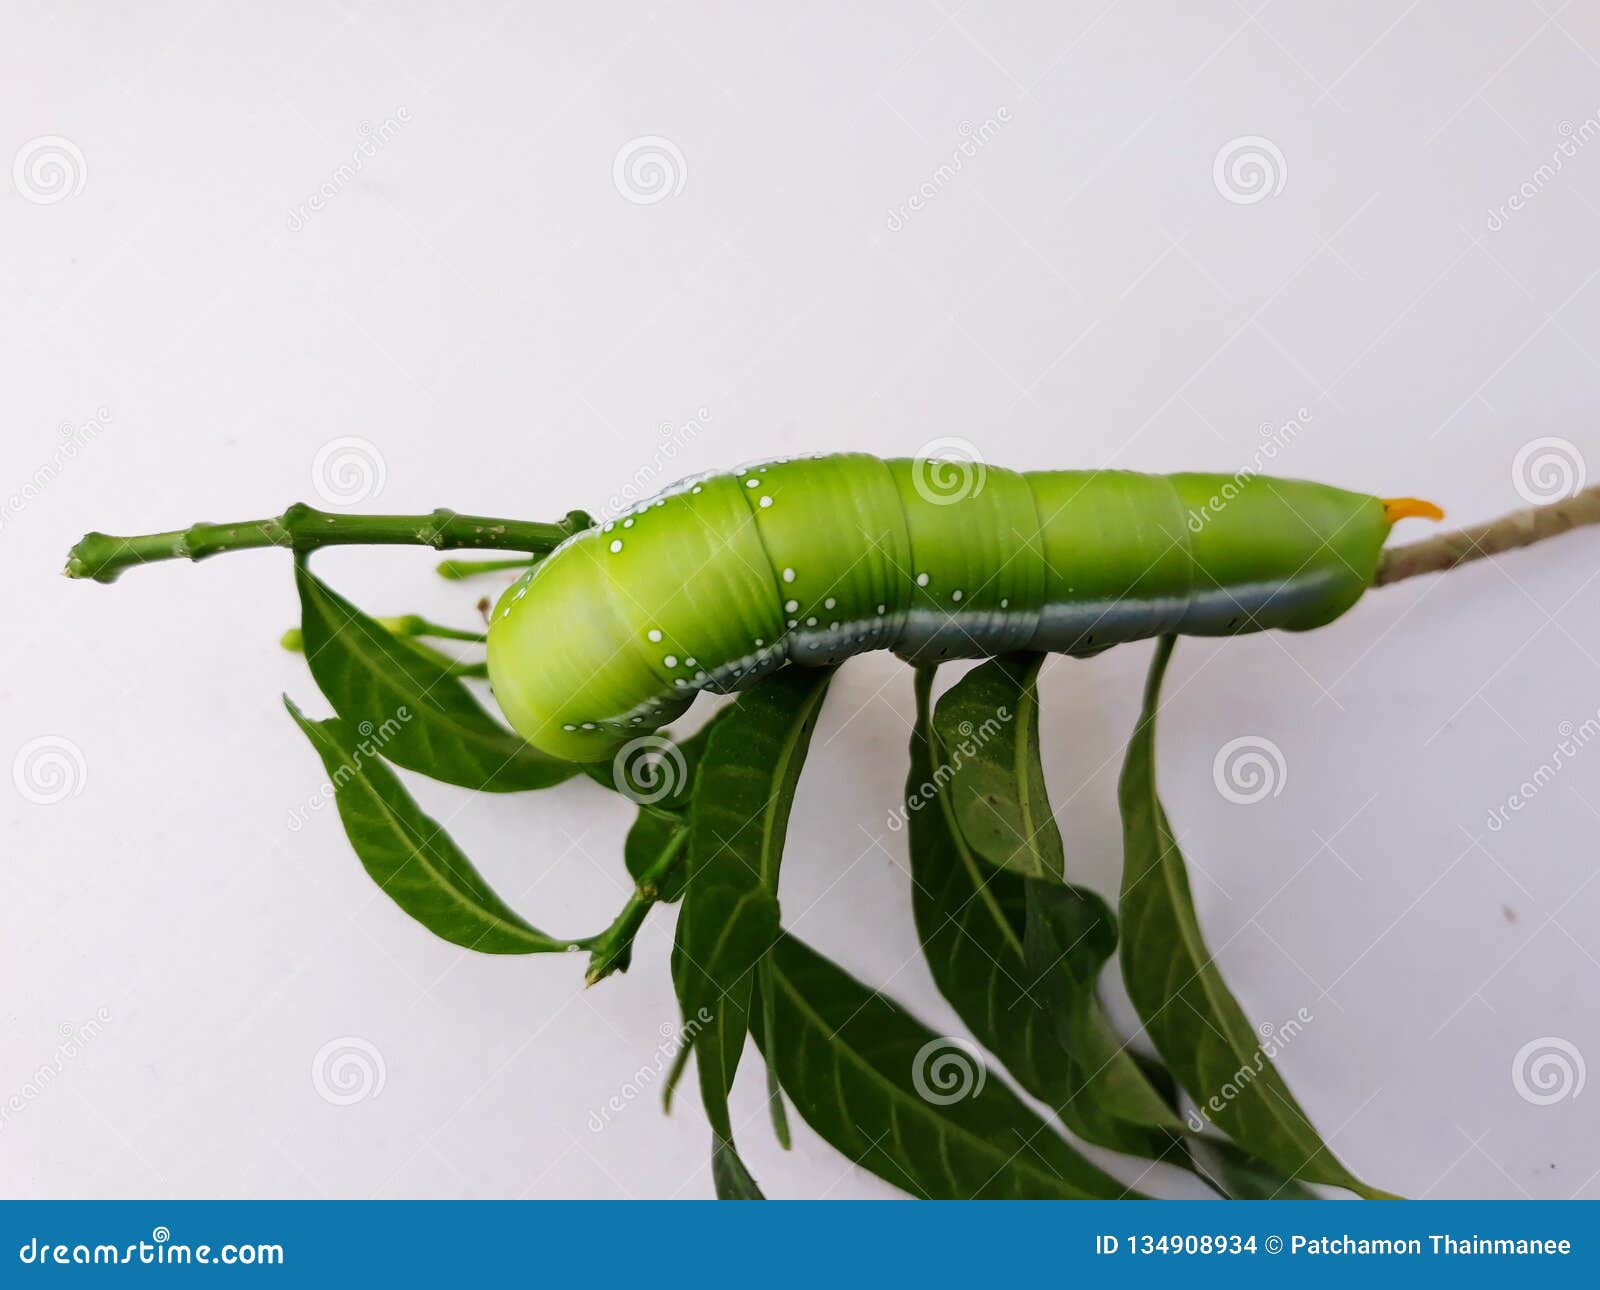 Large Green Worms Eat Leaves, White Background Stock Photo - Image